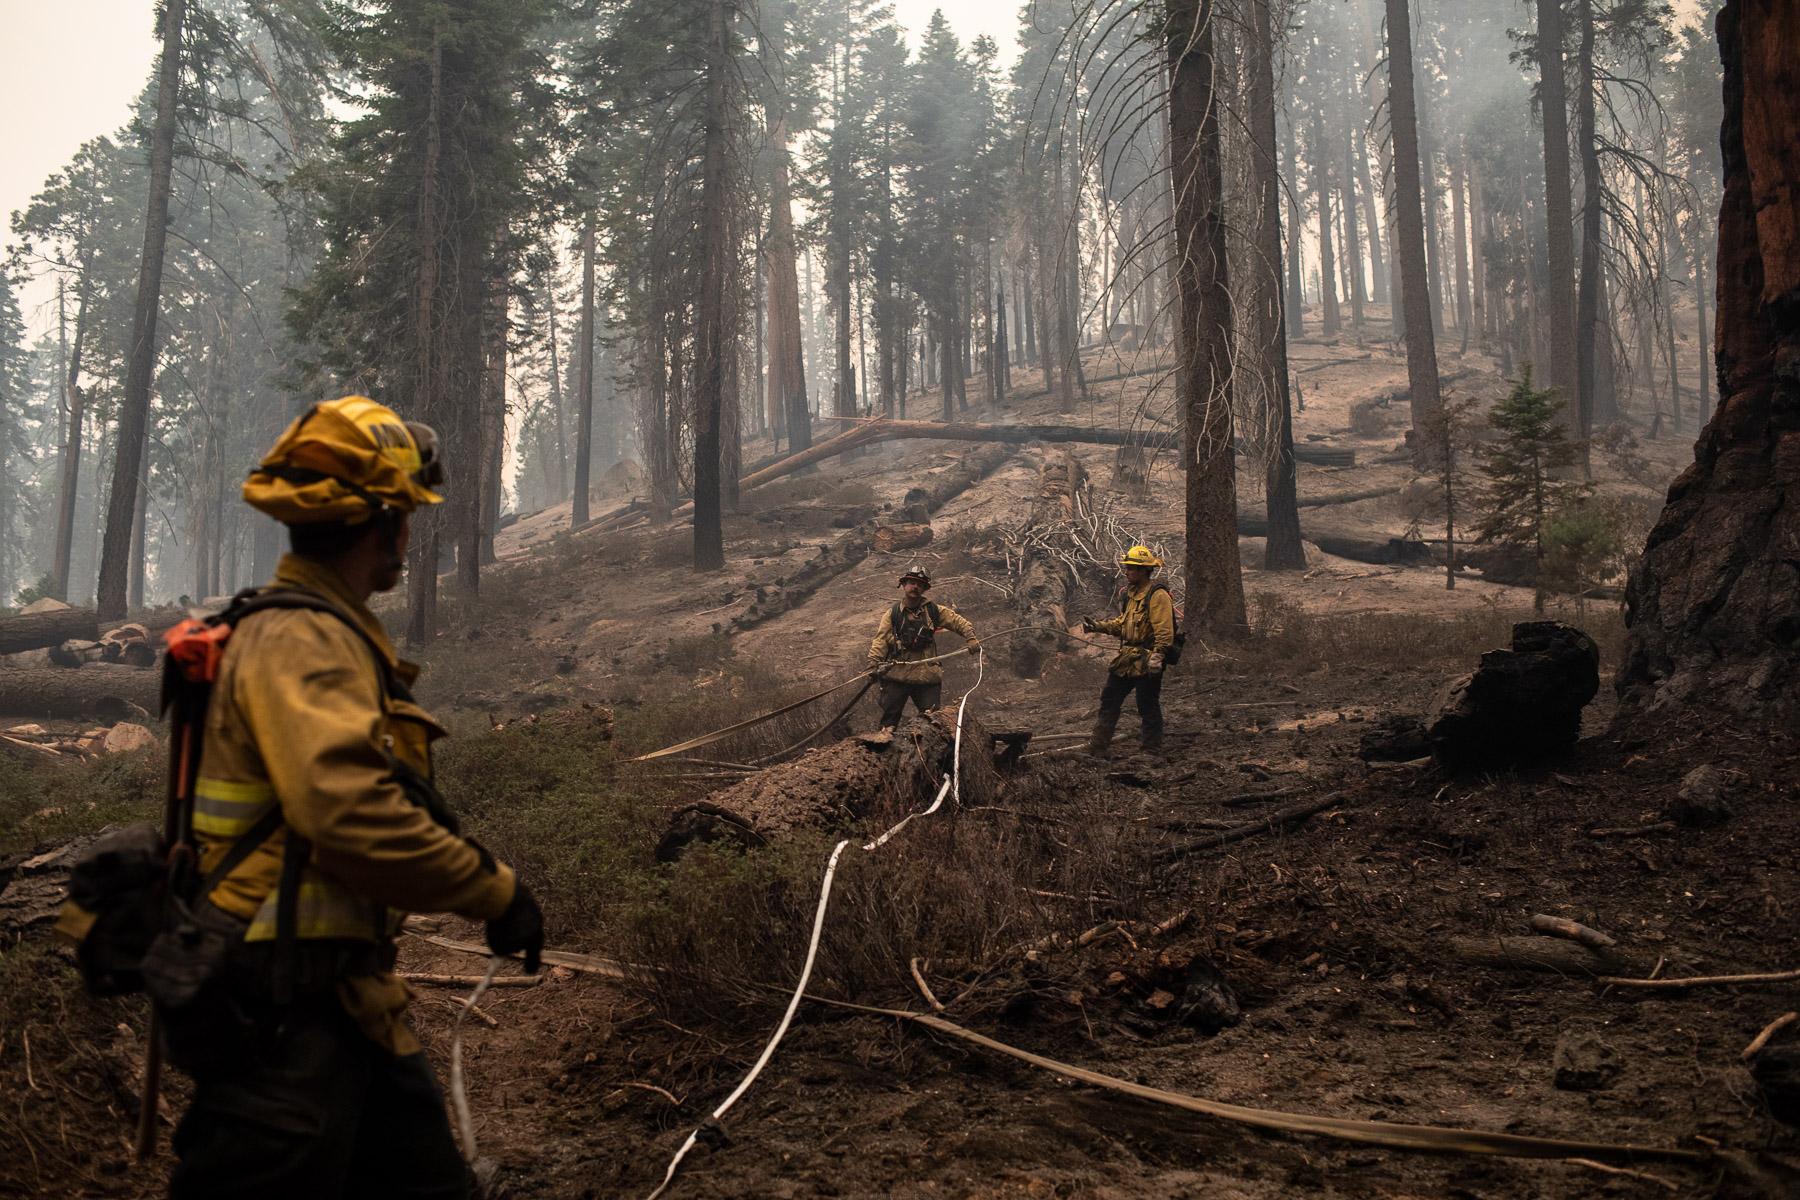 - Sequoia, a year in a burning forest - Fire fighters are setting up watering/irrigation to try...